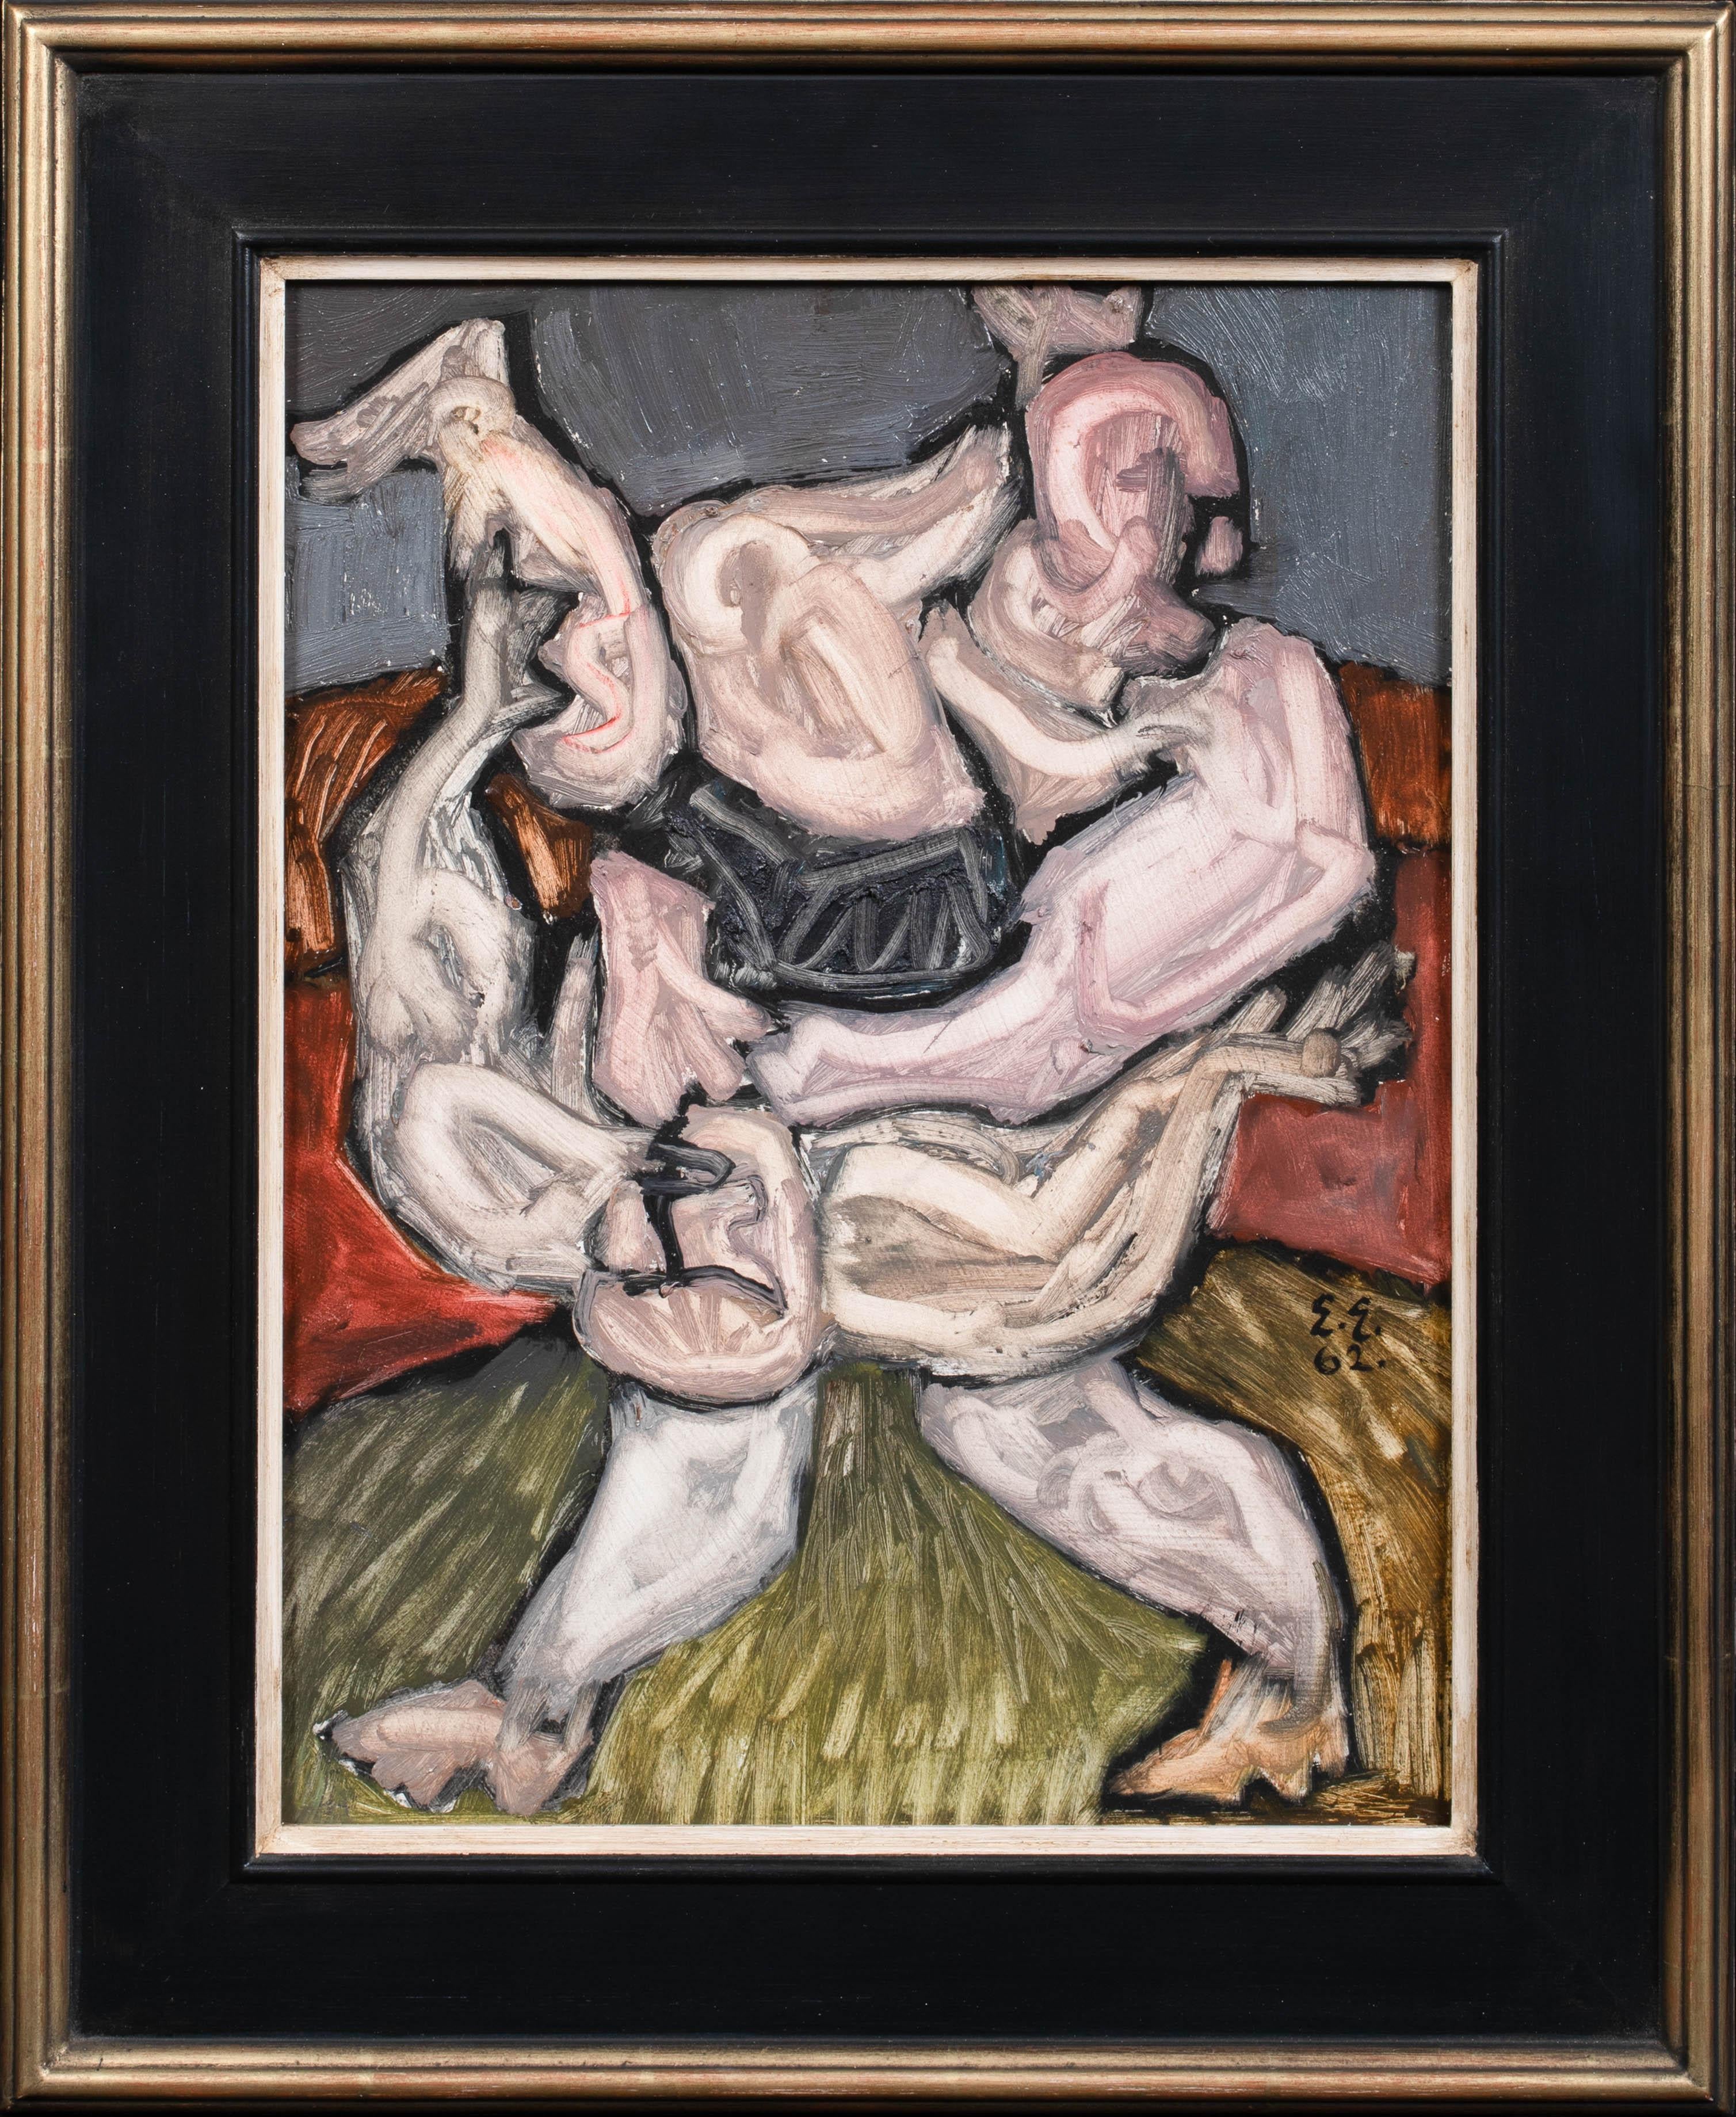 Unknown Figurative Painting - The Wrestlers, dated 1962  signed EE dates 1962 